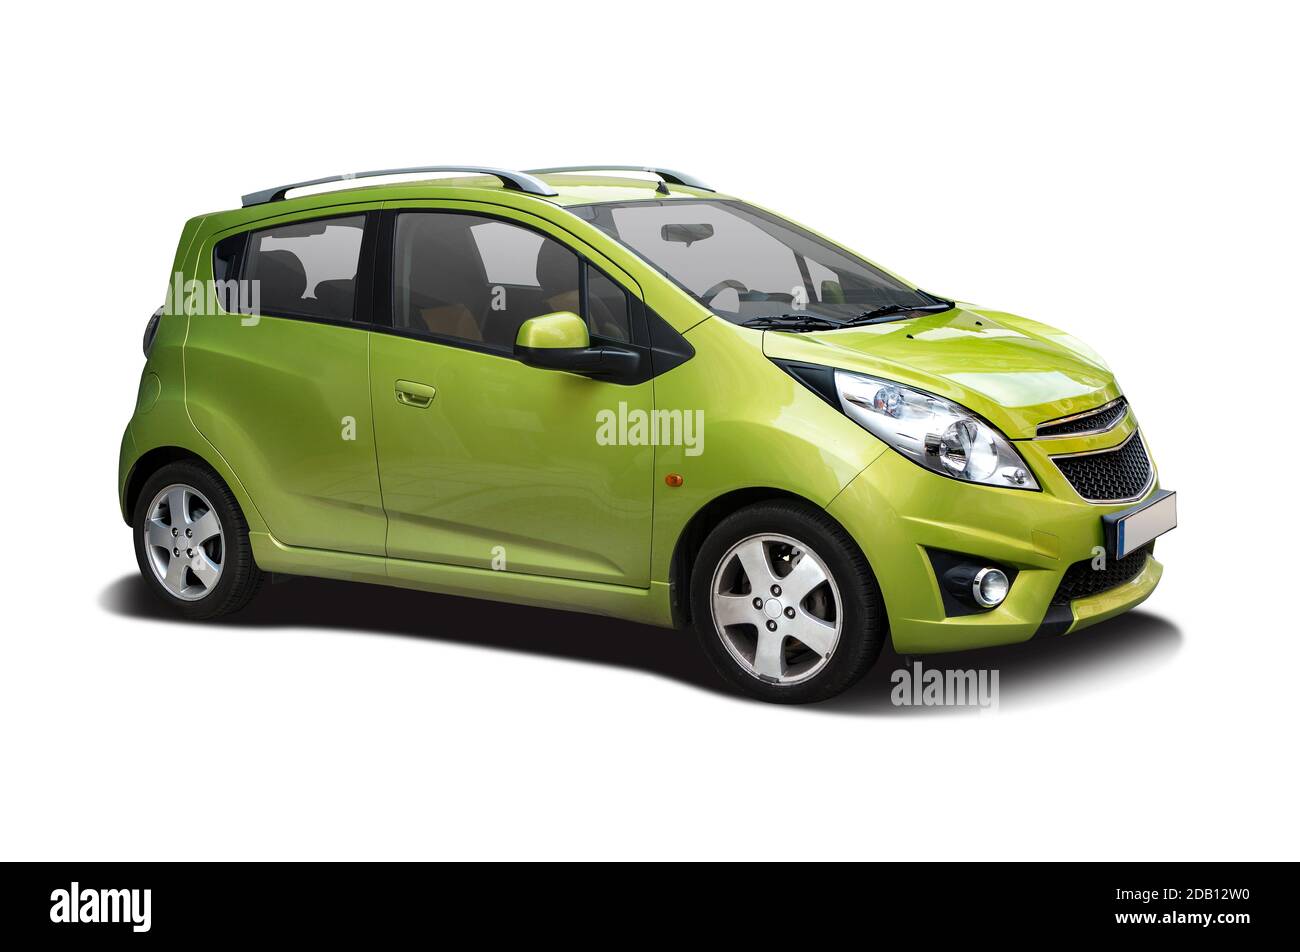 Green small hatchback car isolated on white background Stock Photo